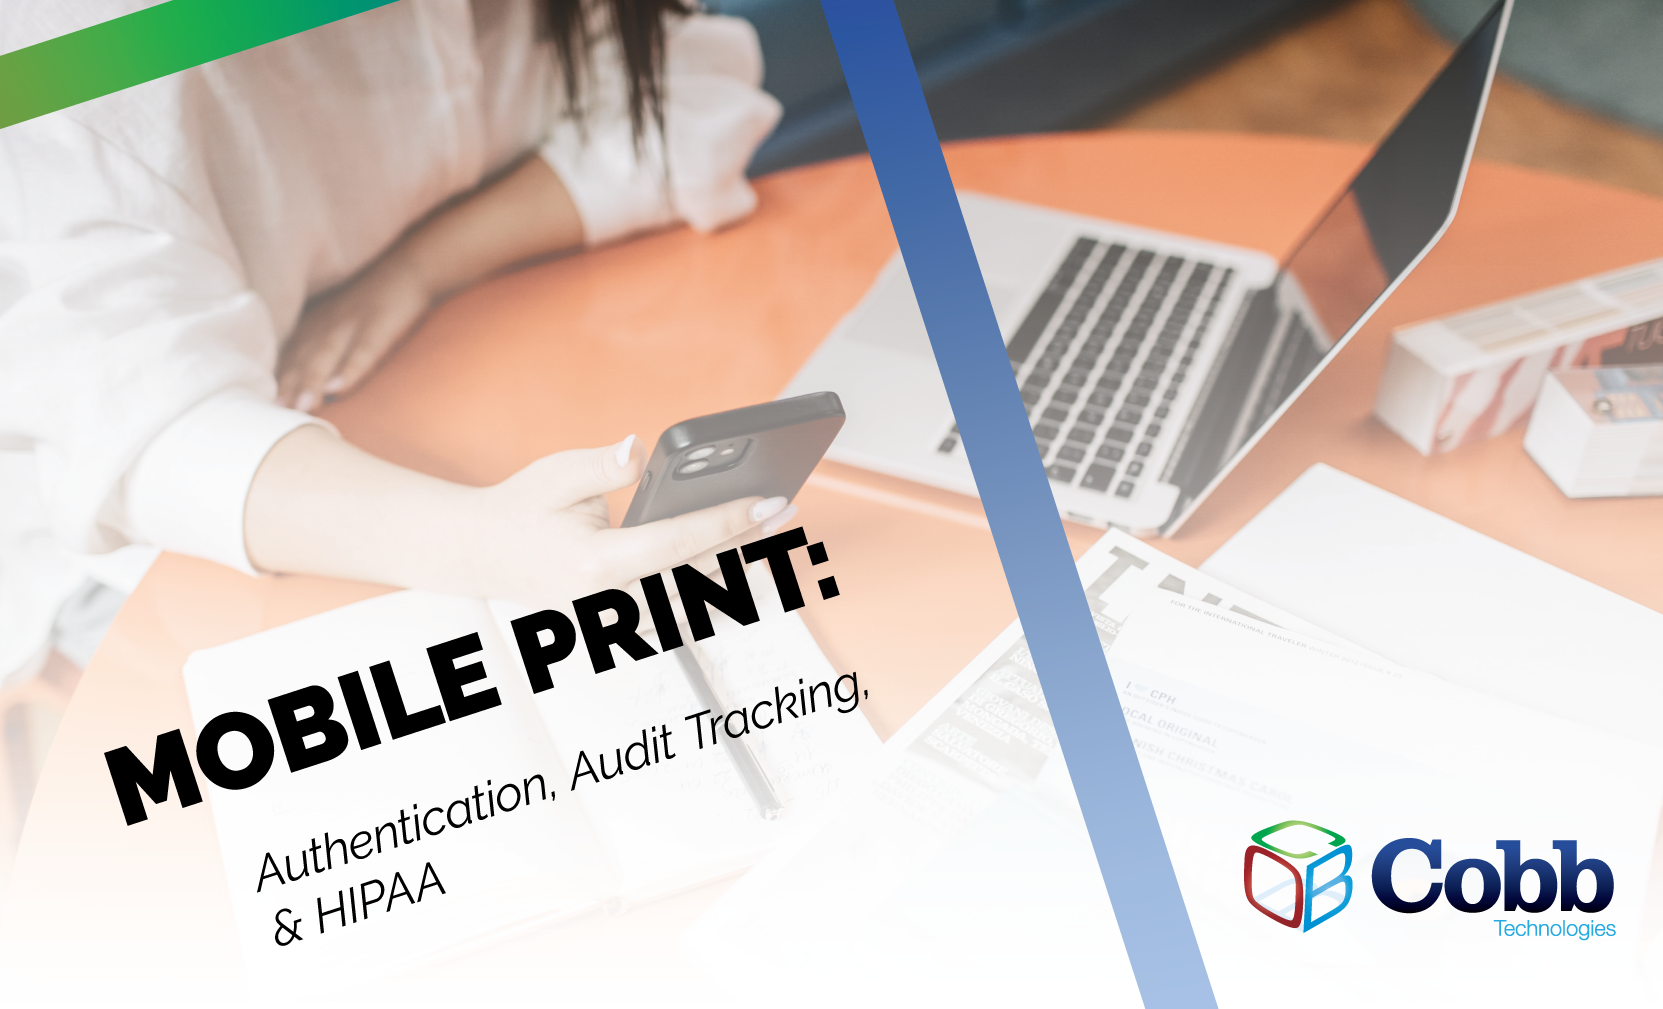 Mobile Printing and Authentication: The Easy Way to Ensure HIPAA Compliance